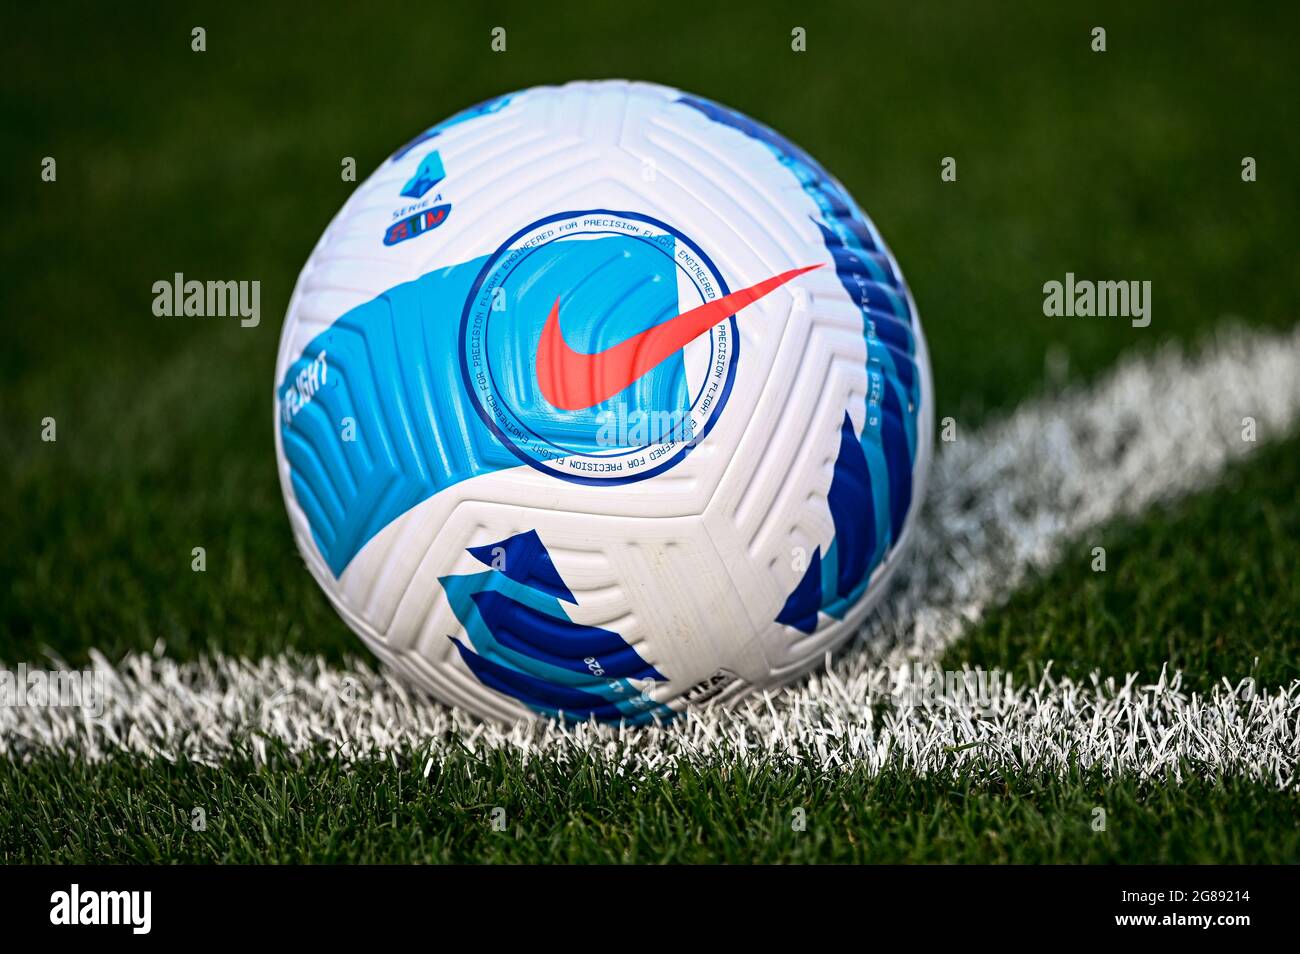 Lugano, Switzerland. 17 July 2021. Official Serie A match ball 'Nike Flight'  is seen prior to the pre-season friendly football match between FC Lugano  and FC Internazionale. Regular time ended 2-2, FC